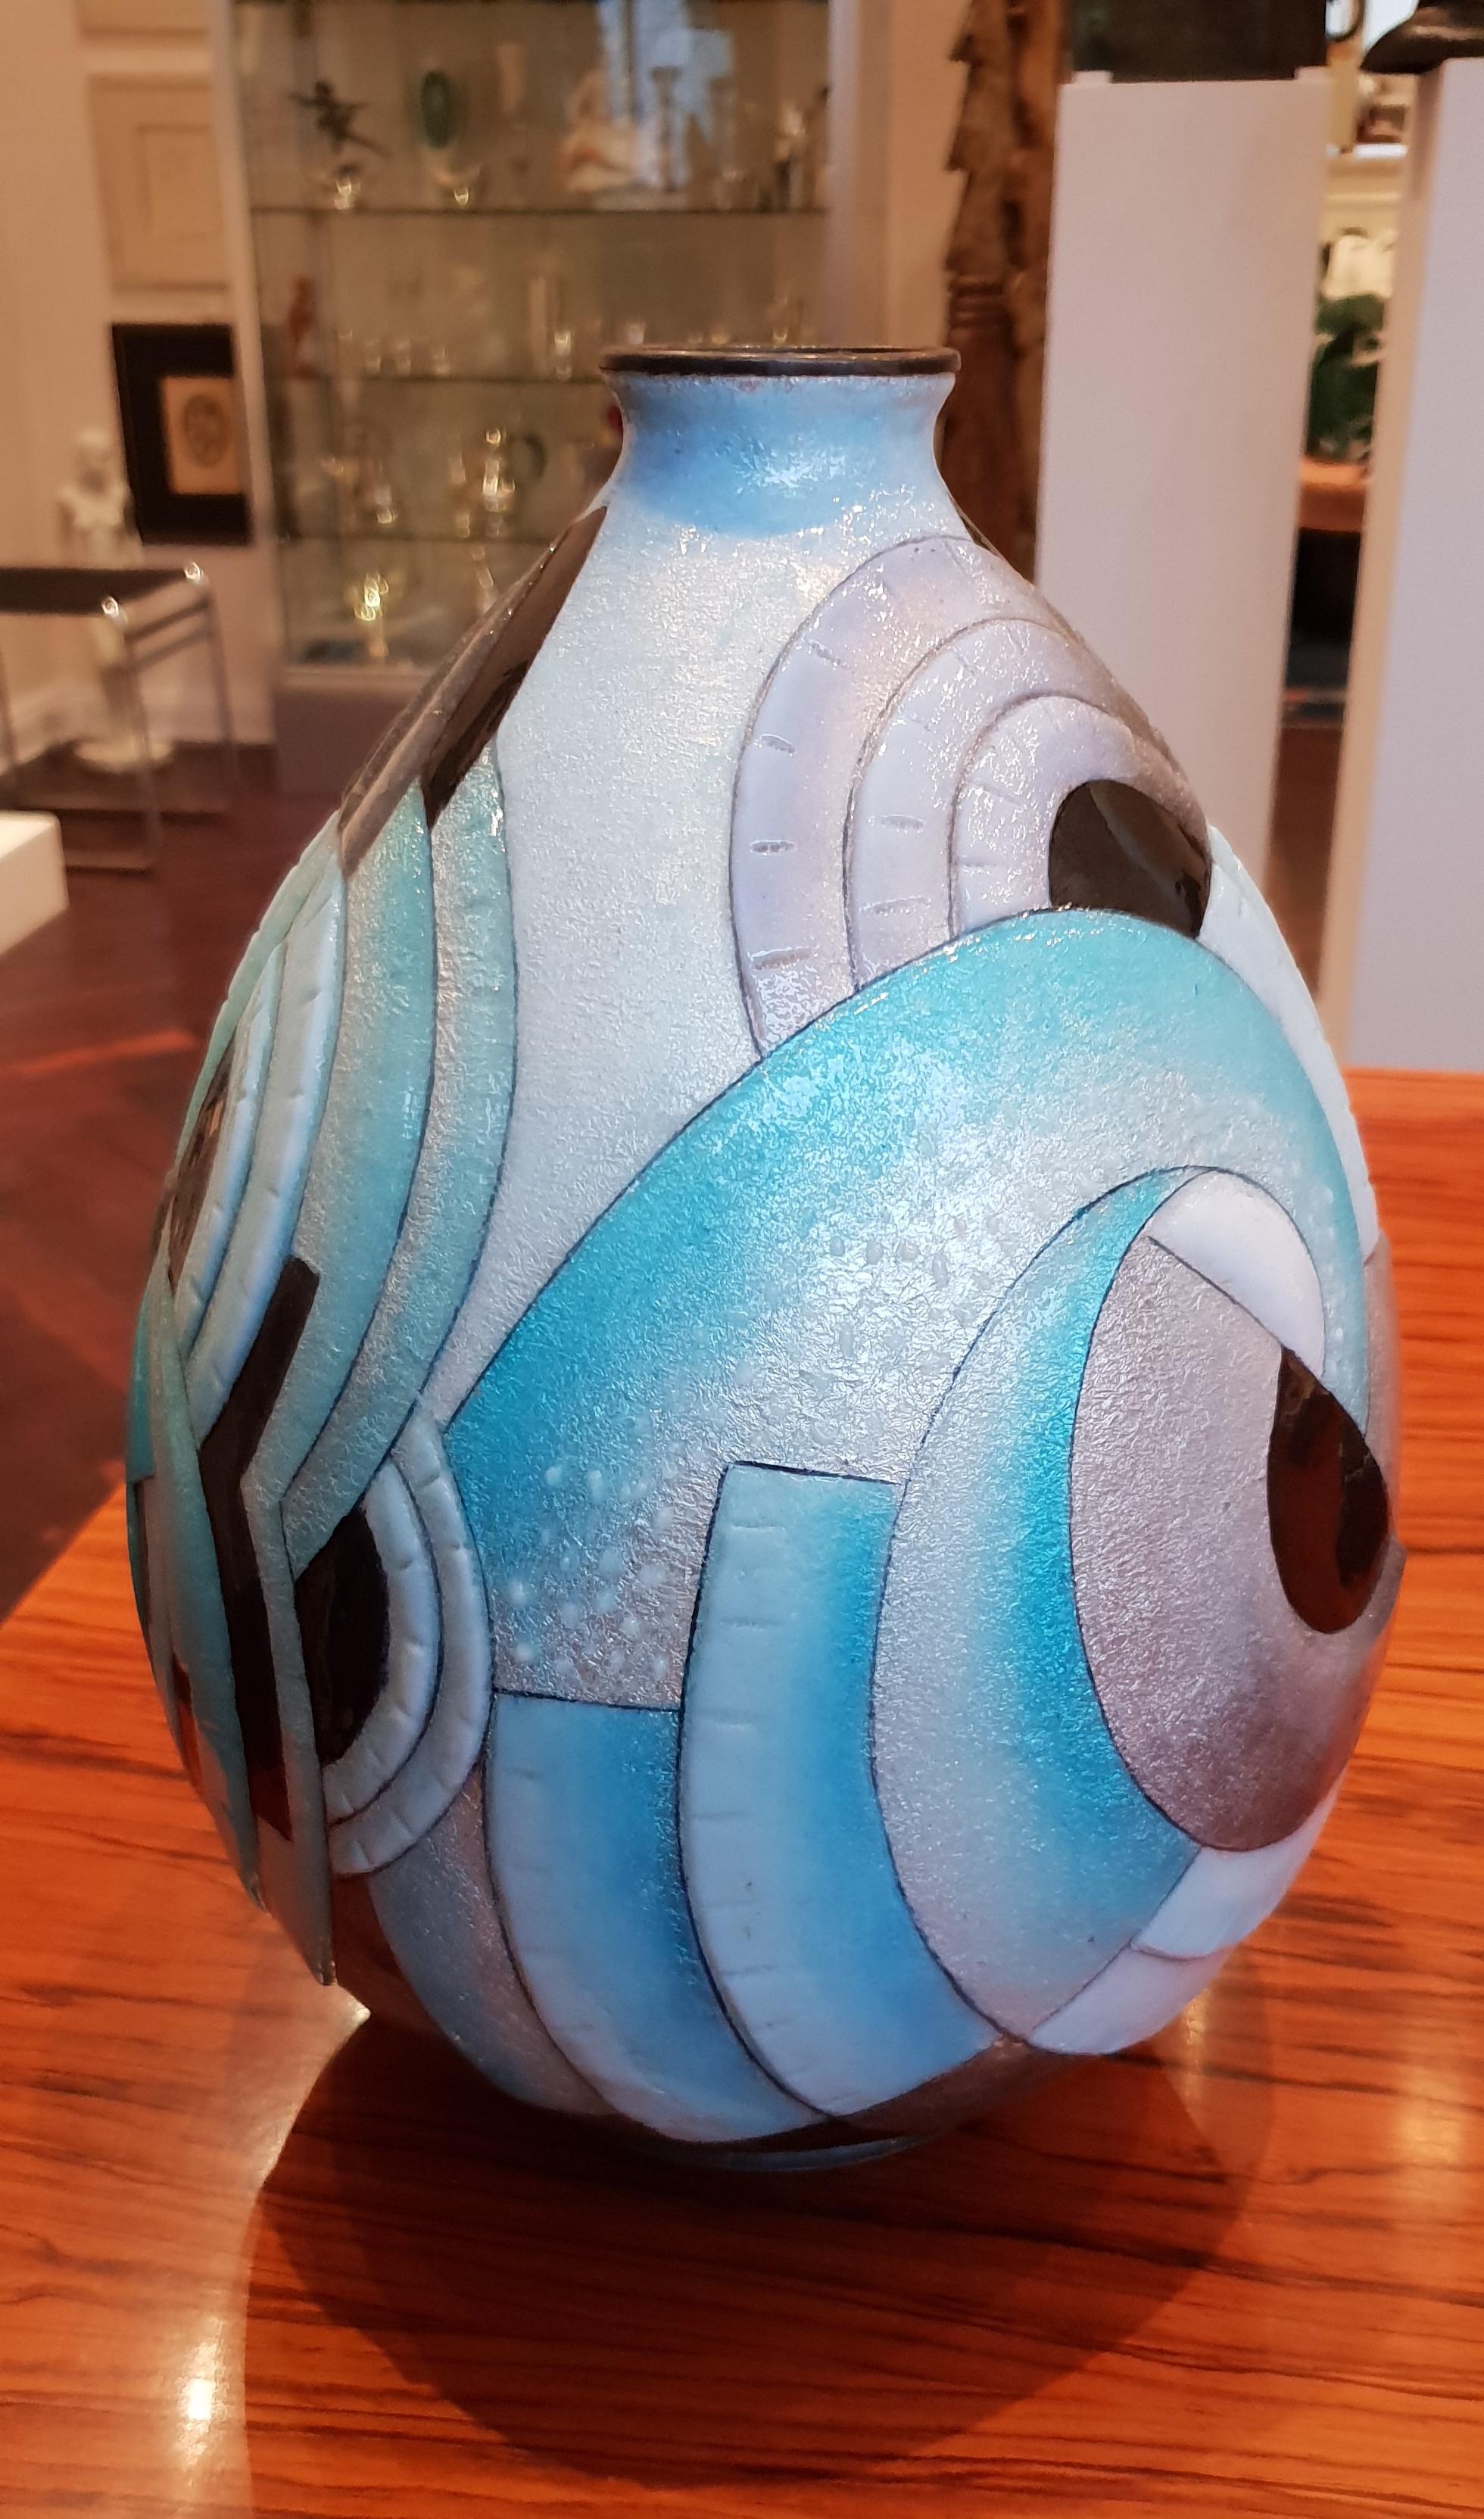 Enameled cooper vase by Camille Fauré ( 1872-1952 ), Limoges.
With geometric high relief in two-ton blue, grey, white and black. Signature to paint on in gold color: C. Fauré Limoges
Height: 12.2 in ( 31 cm ), Diameter 10 in ( 25,4 cm )